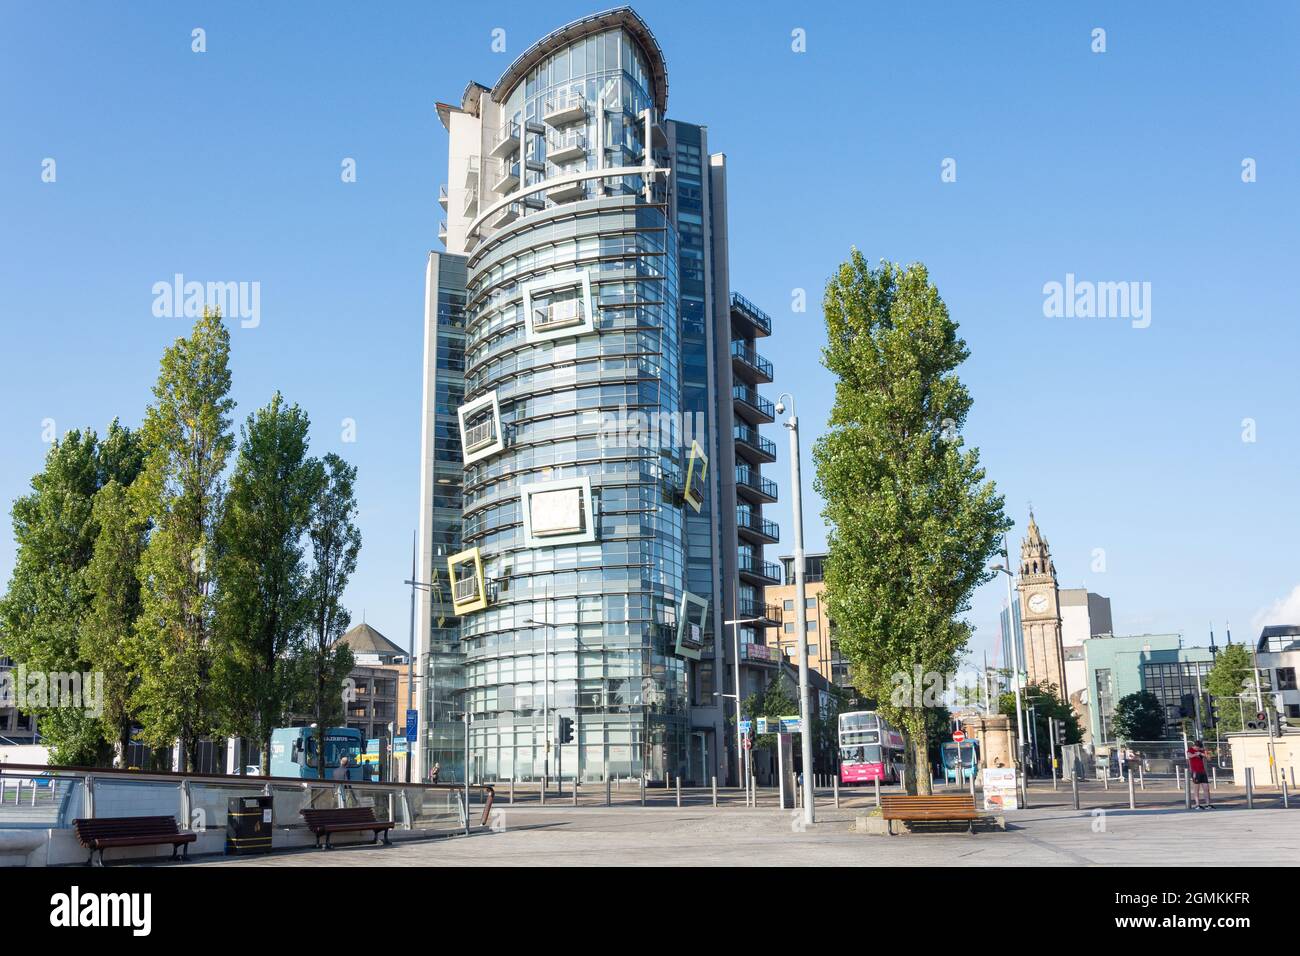 The Boat building, Queen's Square, City of Belfast, Northern Ireland, United Kingdom Stock Photo